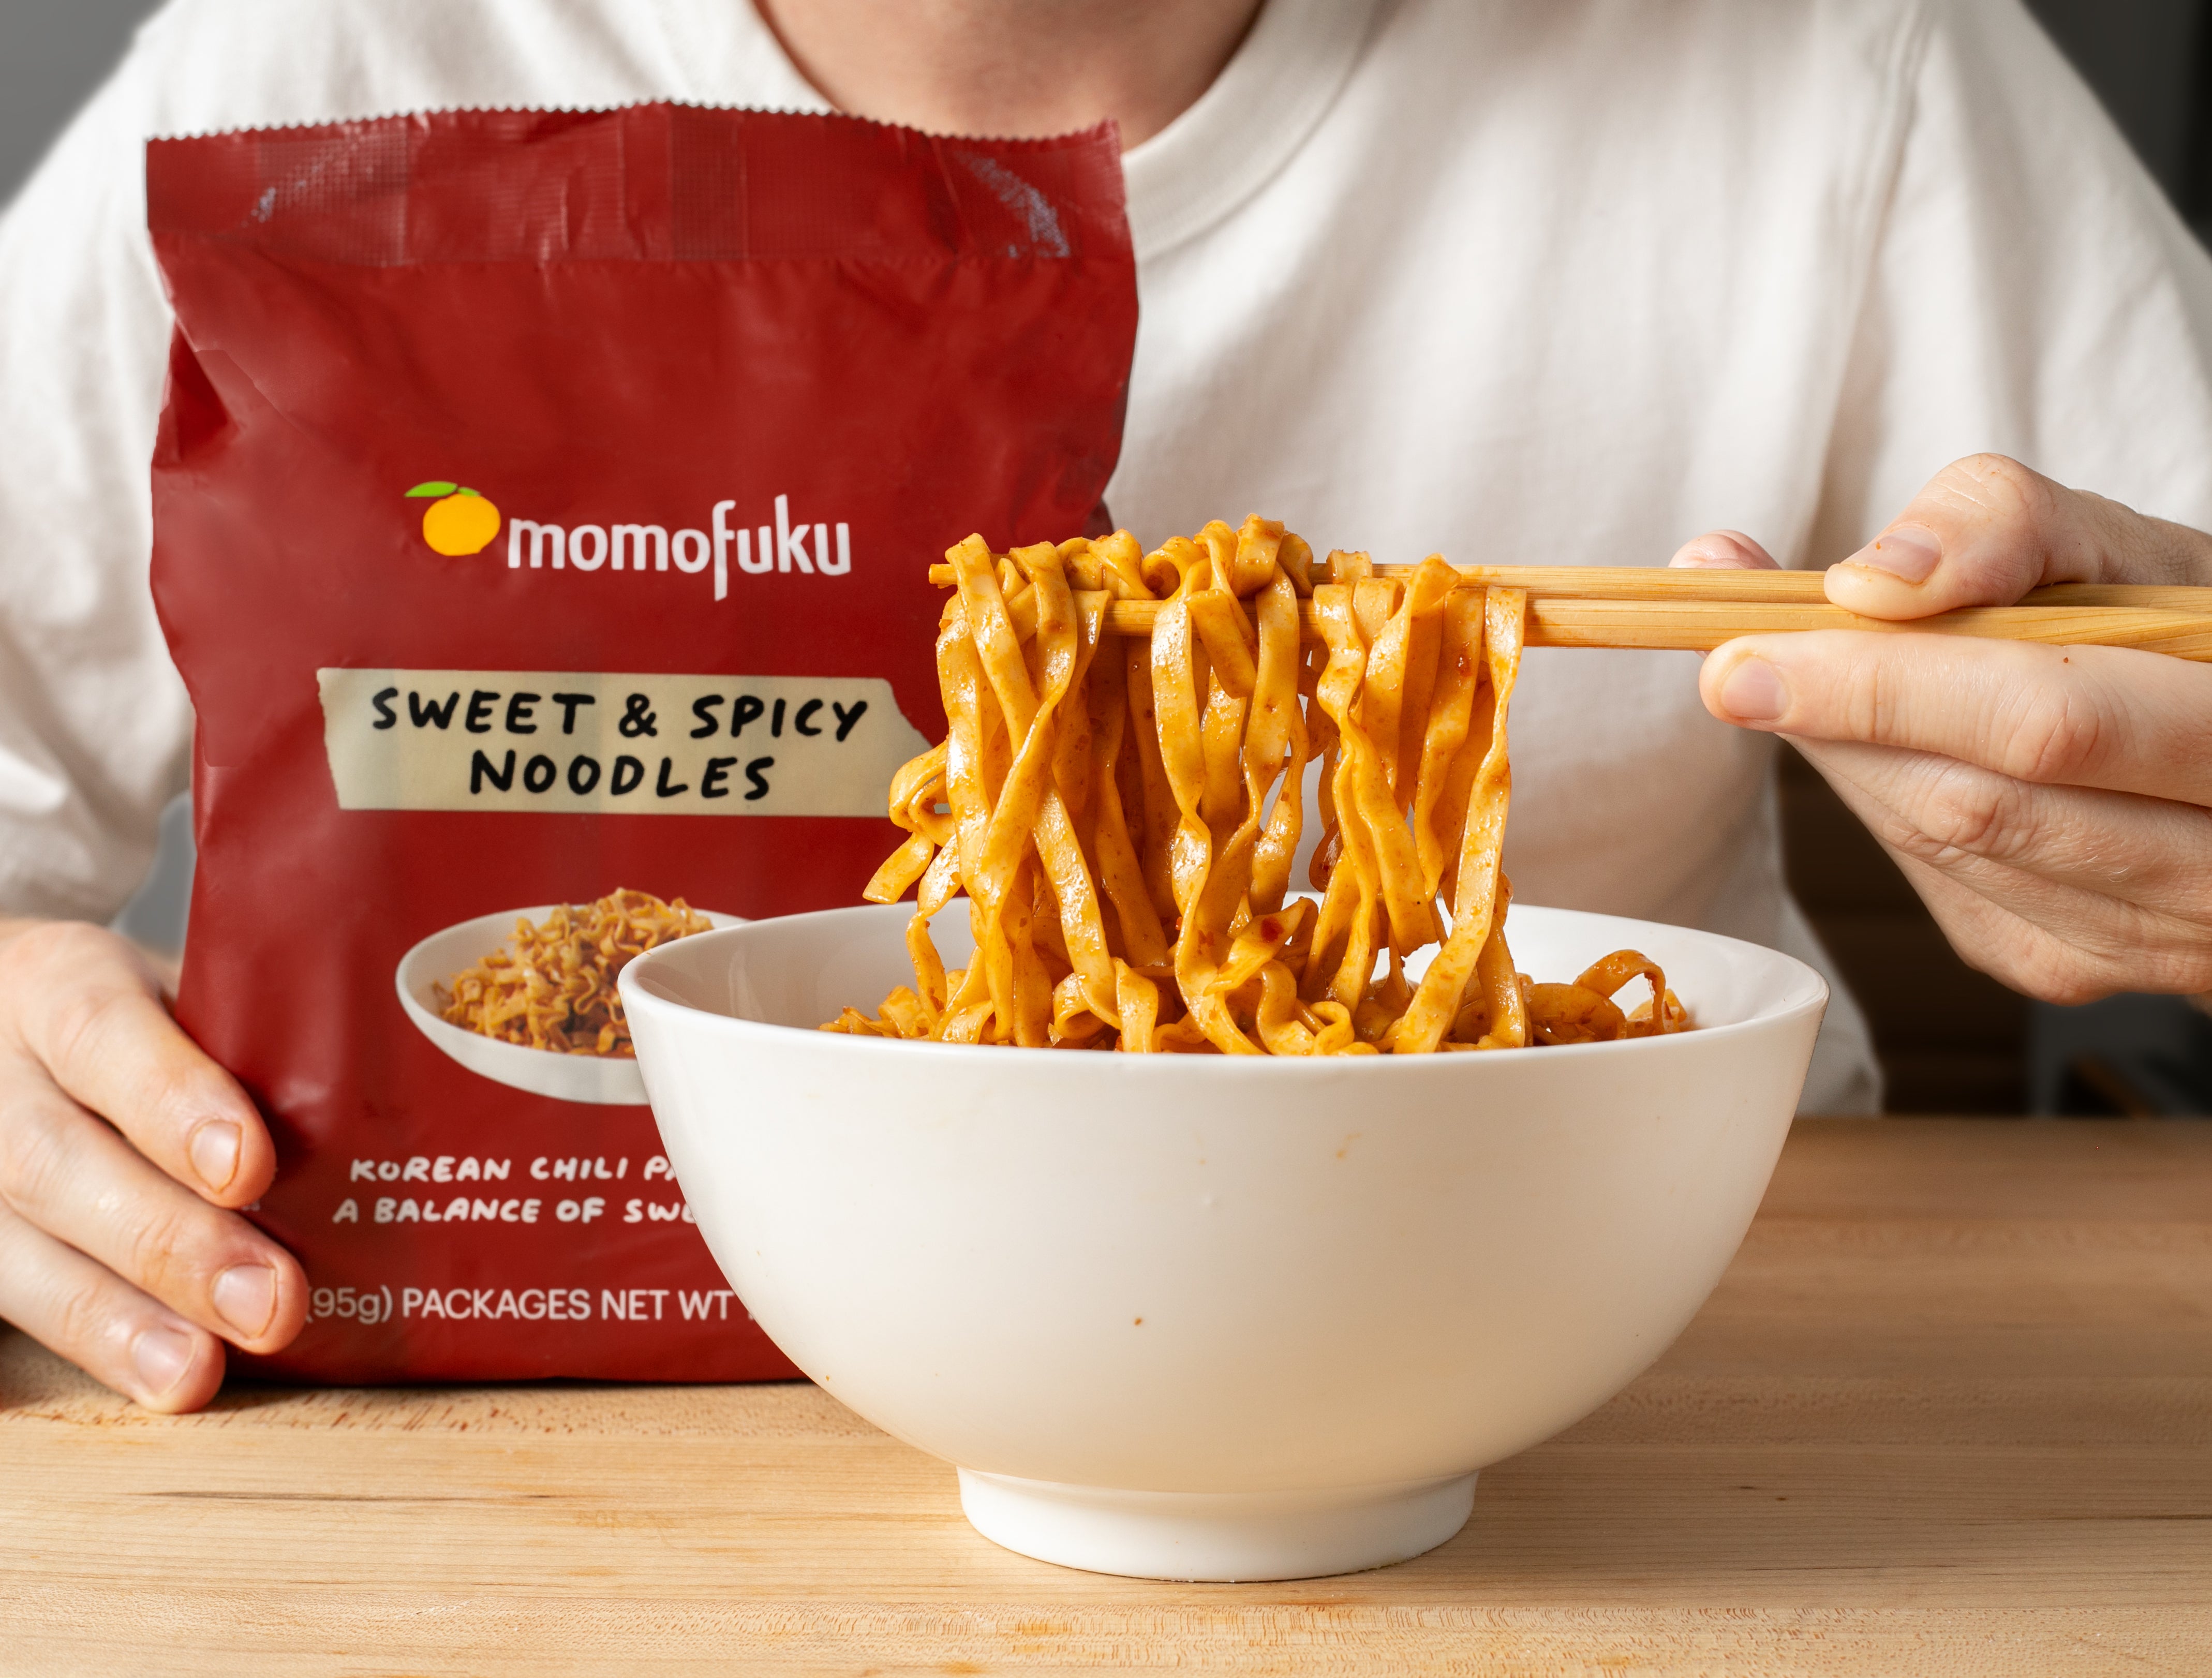 A person with a bowl of Sweet &amp; Spicy noodles and a Momofuku Sweet &amp; Spicy Noodles package